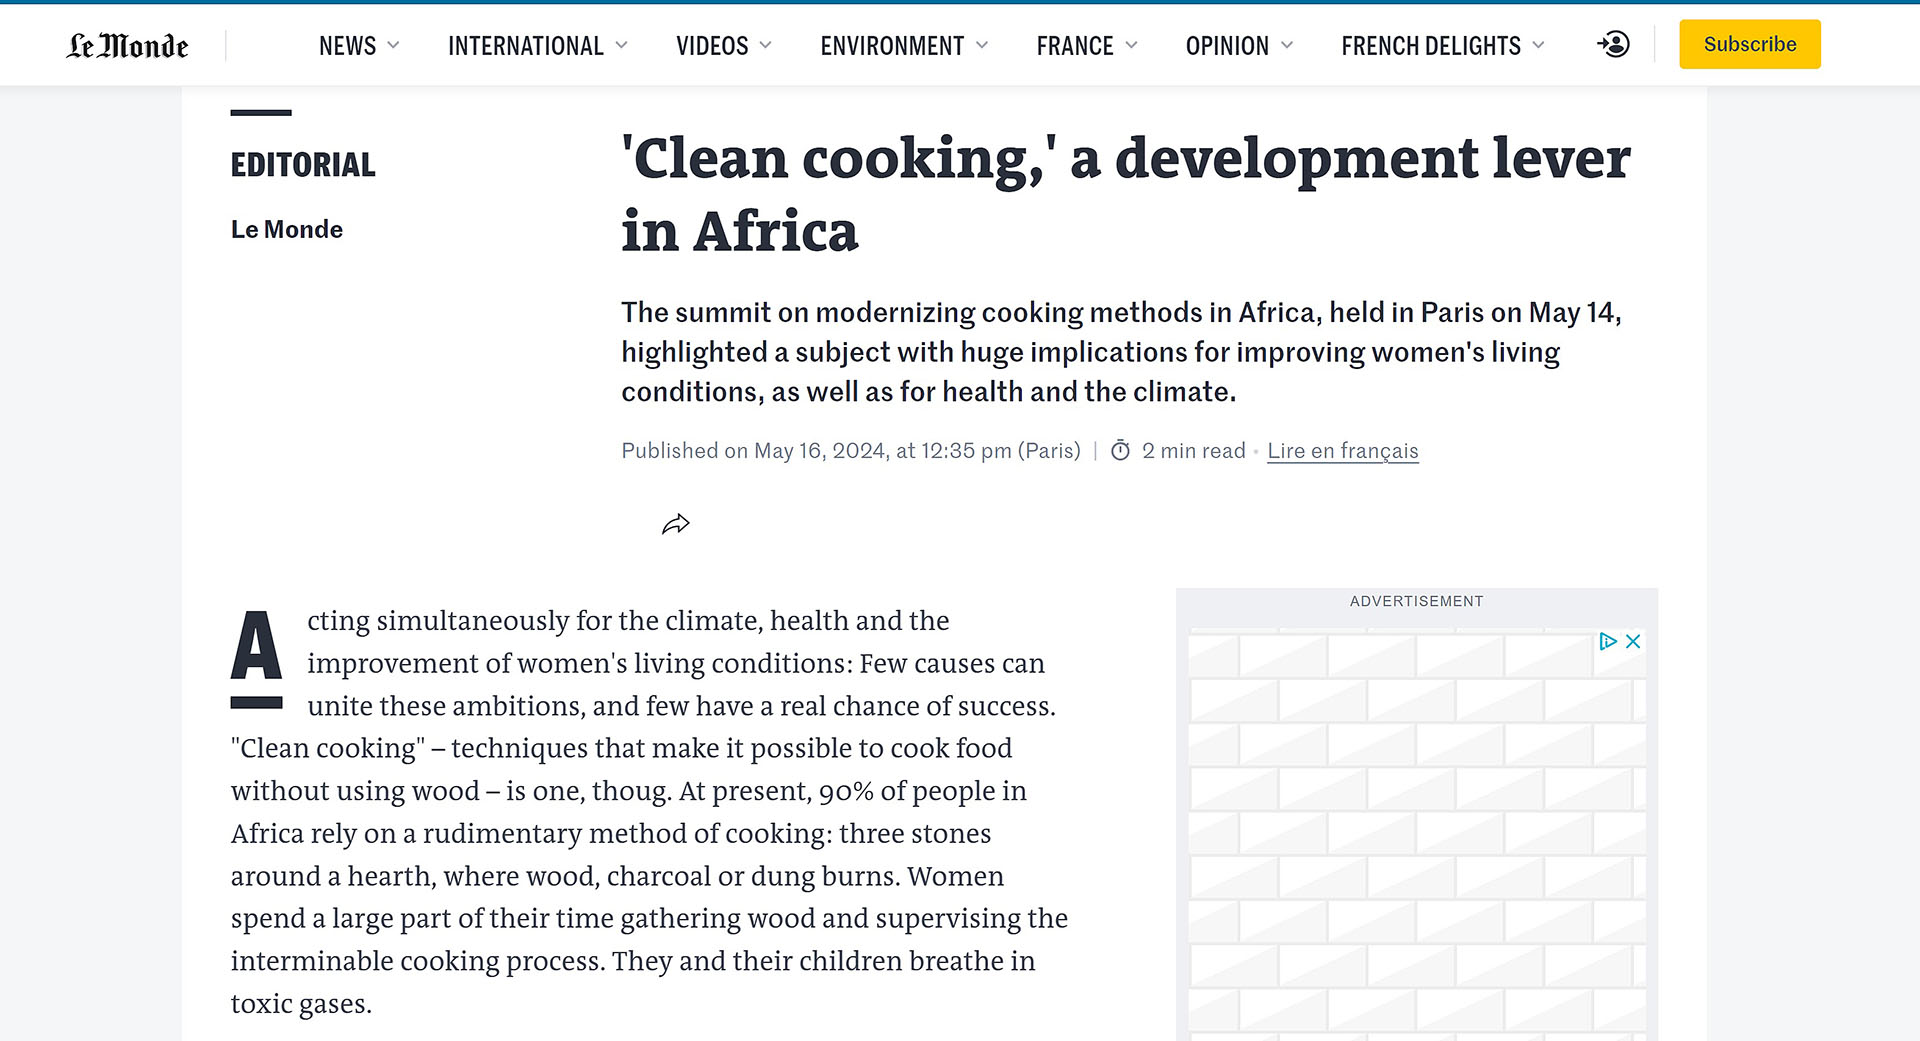 Editorial from Le Monde, 16 May 2024, commenting on the IEA Summit on Clean Cooking for Africa